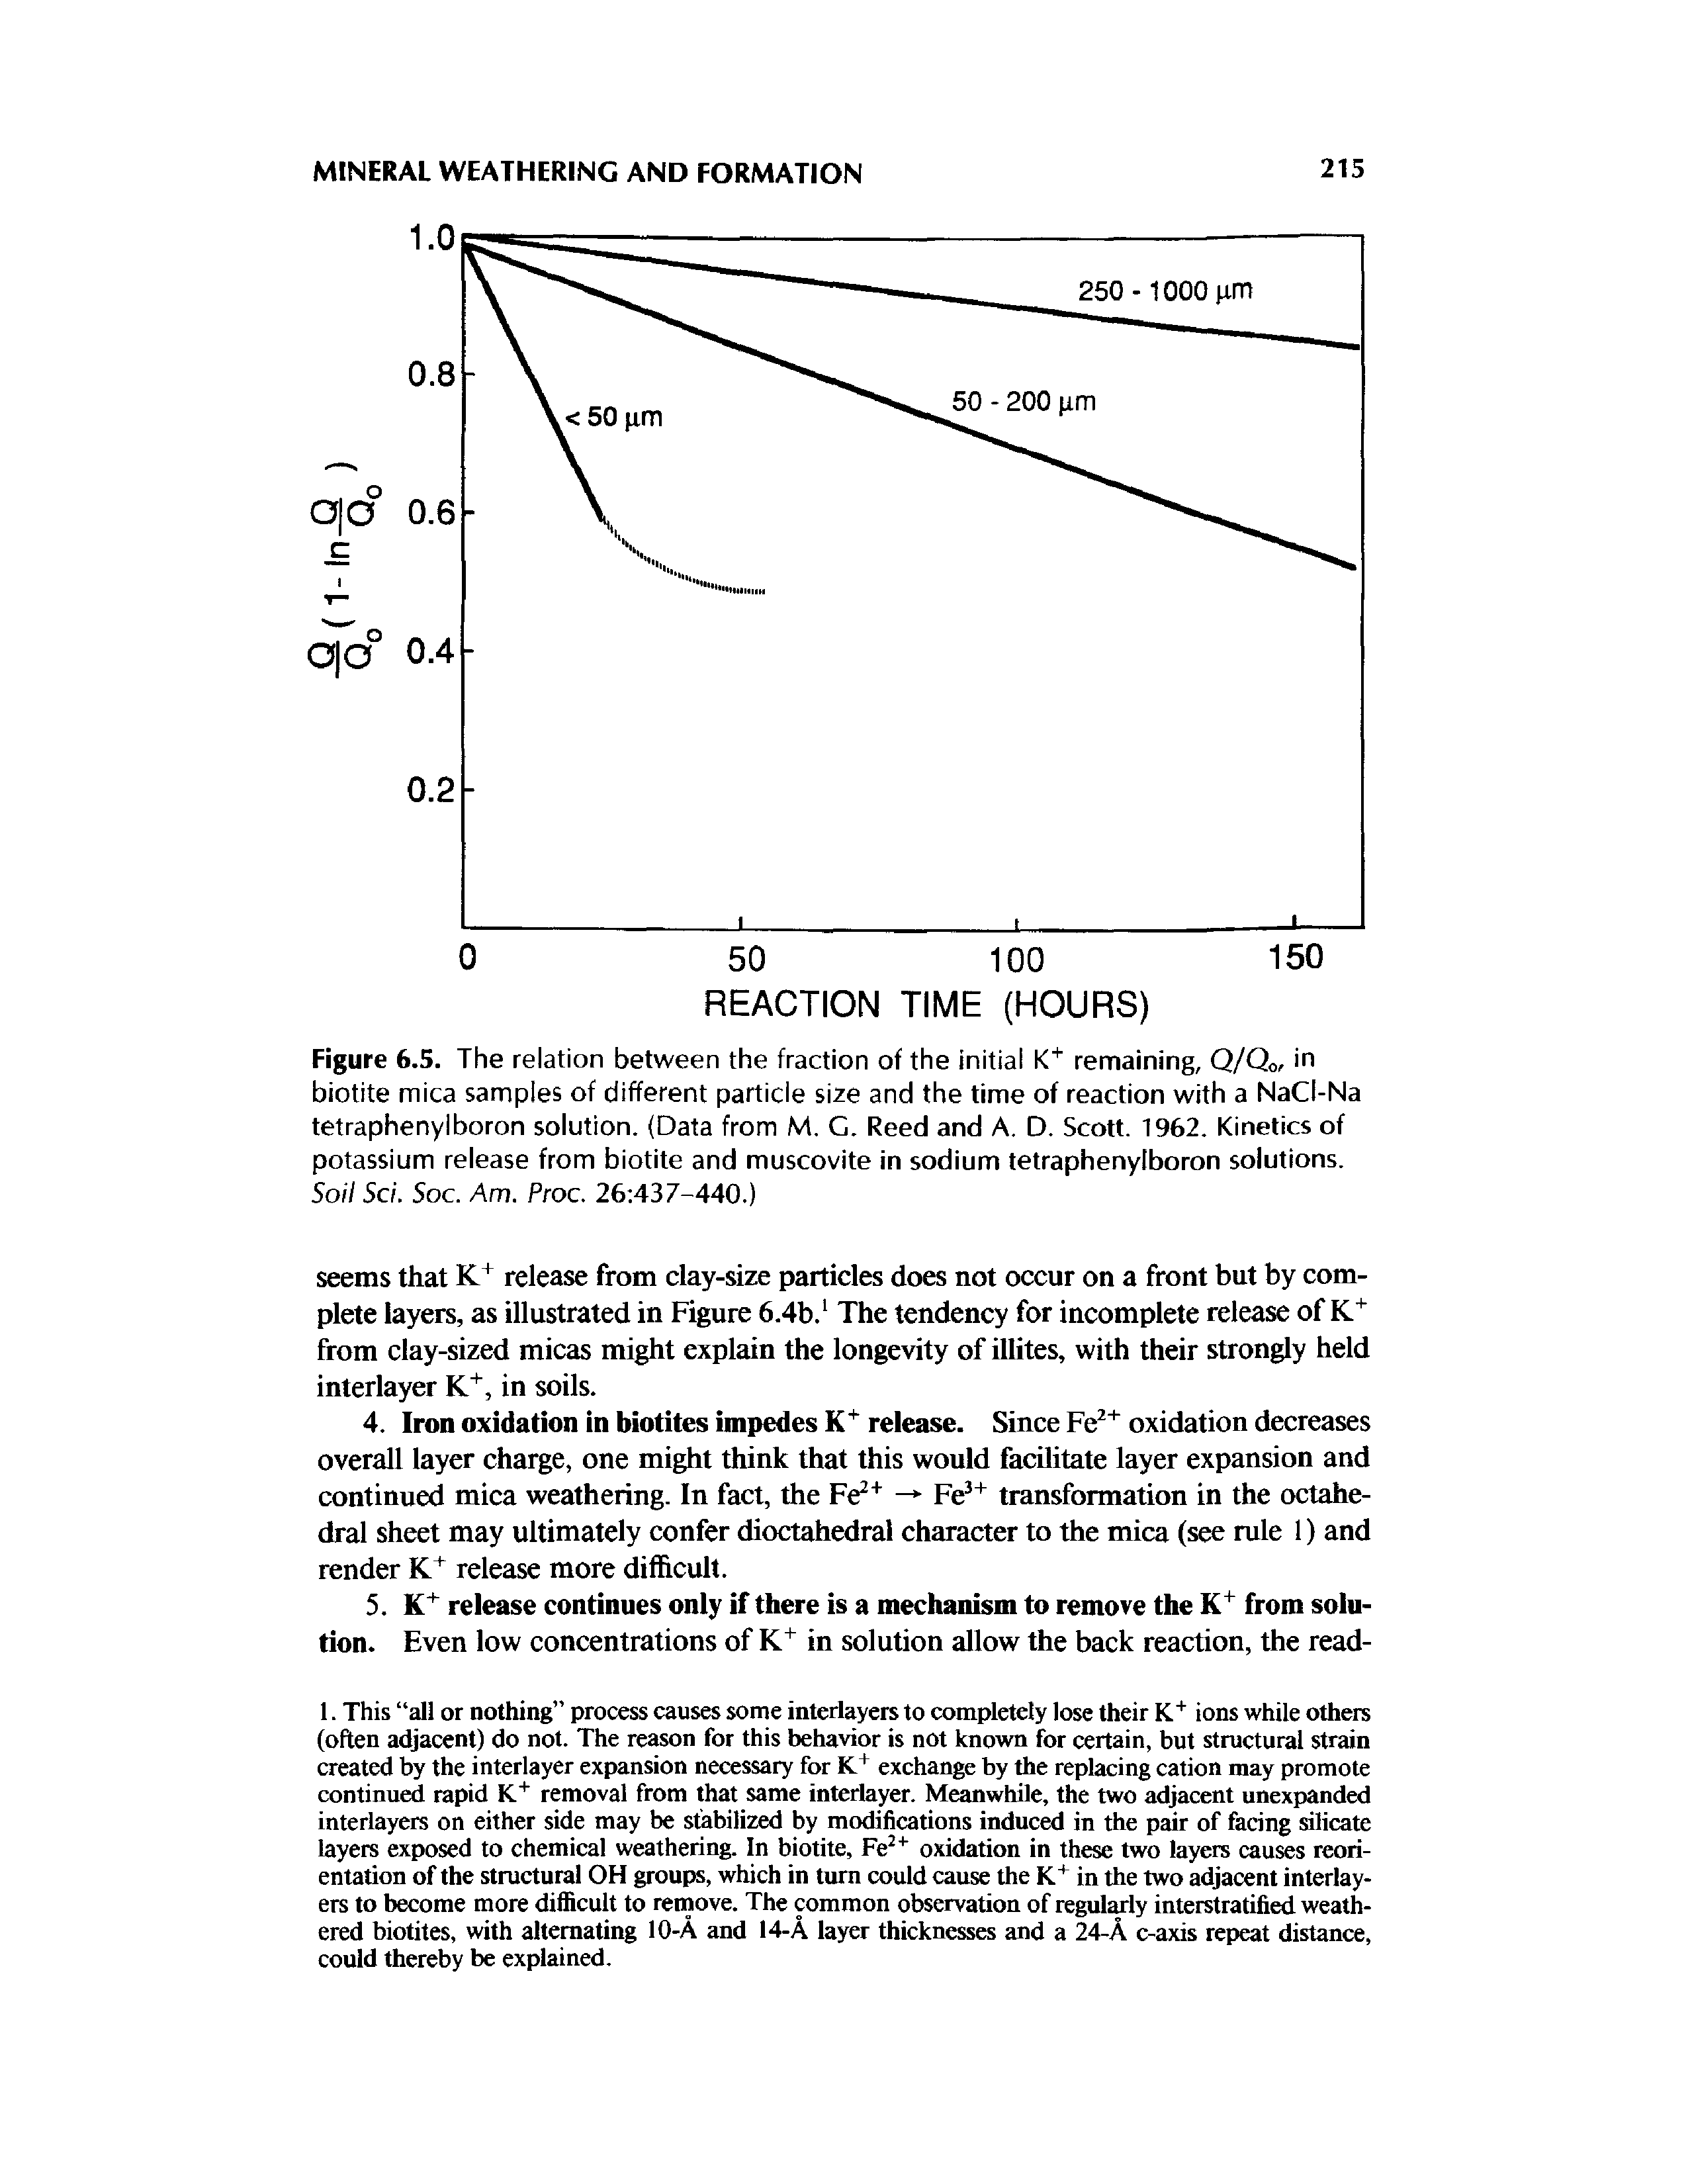 Figure 6.5. The relation between the fraction of the initial K" remaining, Q/Qo, in biotite mica samples of different particle si2e and the time of reaction with a NaCl-Na tetraphenylboron solution. (Data from M. G. Reed and A. D. Scott. 1962. Kinetics of potassium release from biotite and muscovite in sodium tetraphenylboron solutions. Soil Sci. Soc. Am. Proc. 26 437-440.)...